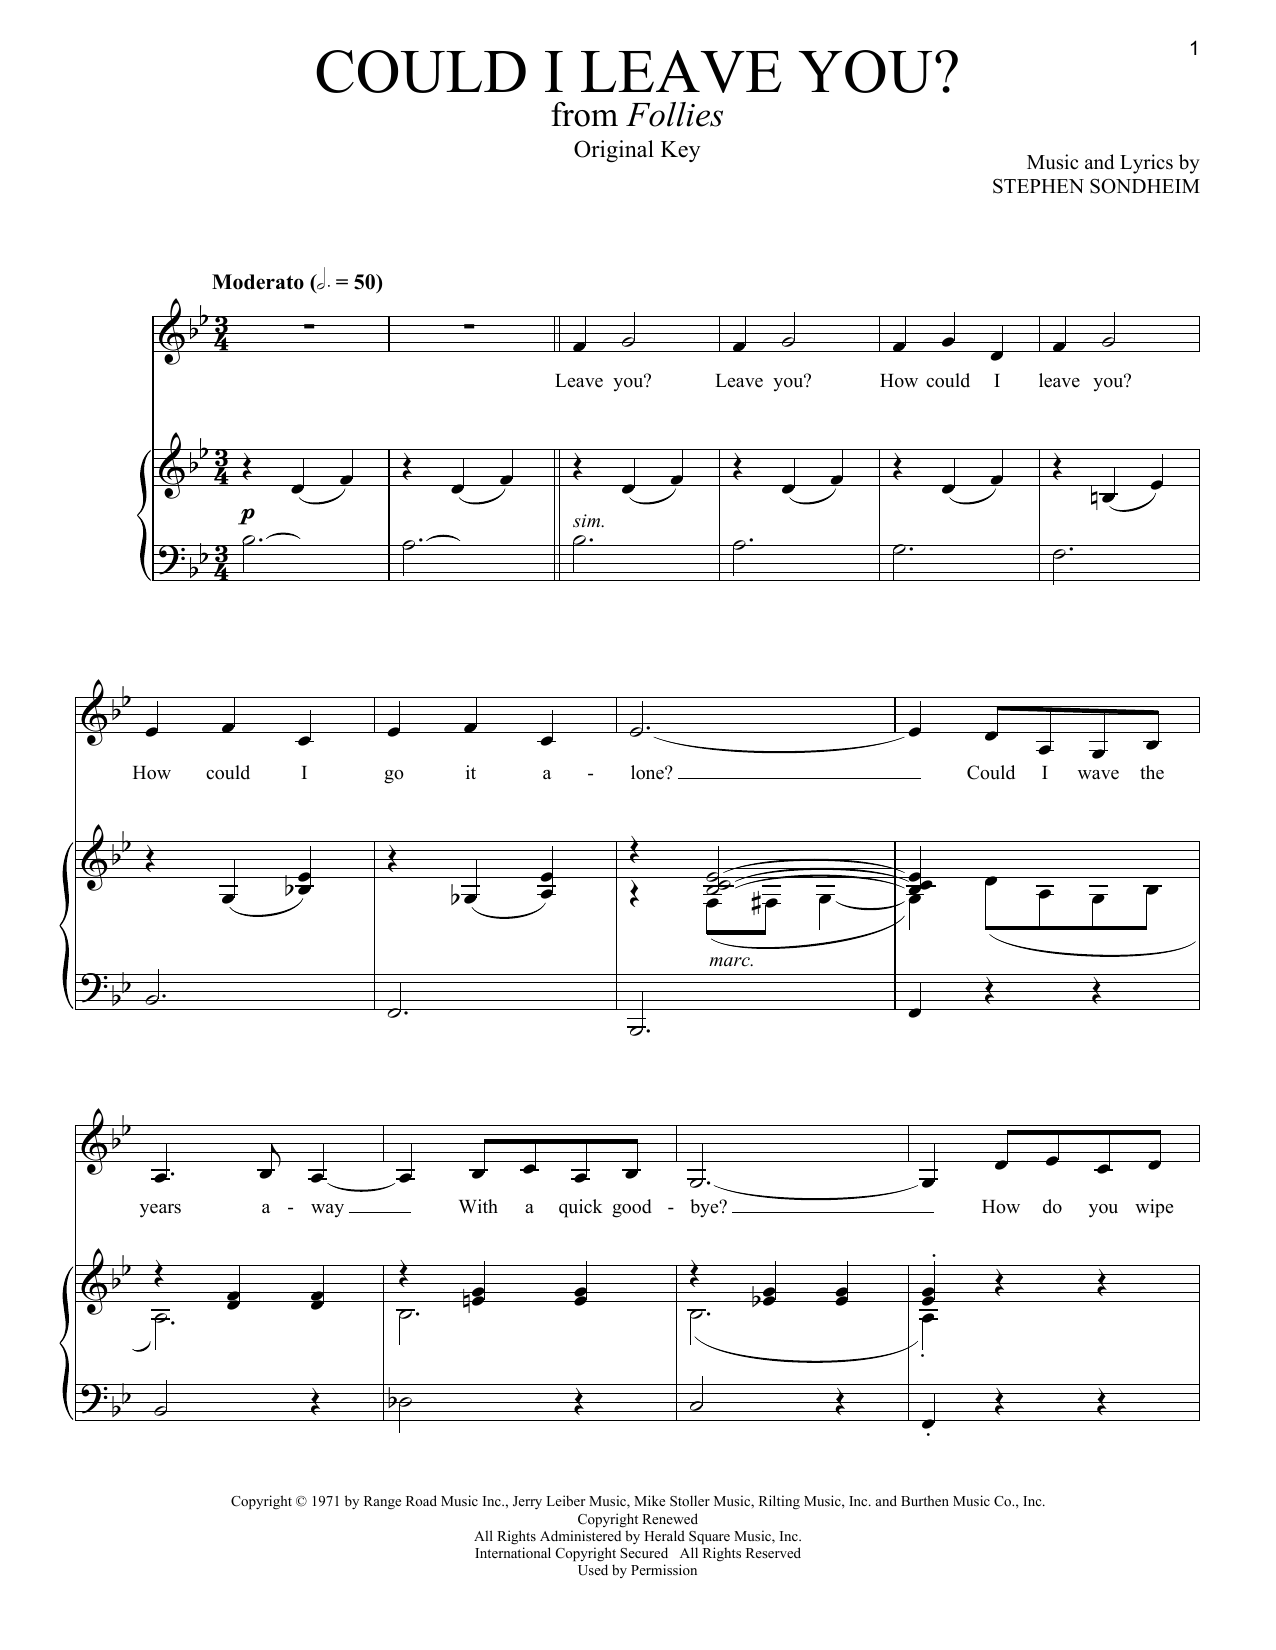 Download Stephen Sondheim Could I Leave You? Sheet Music